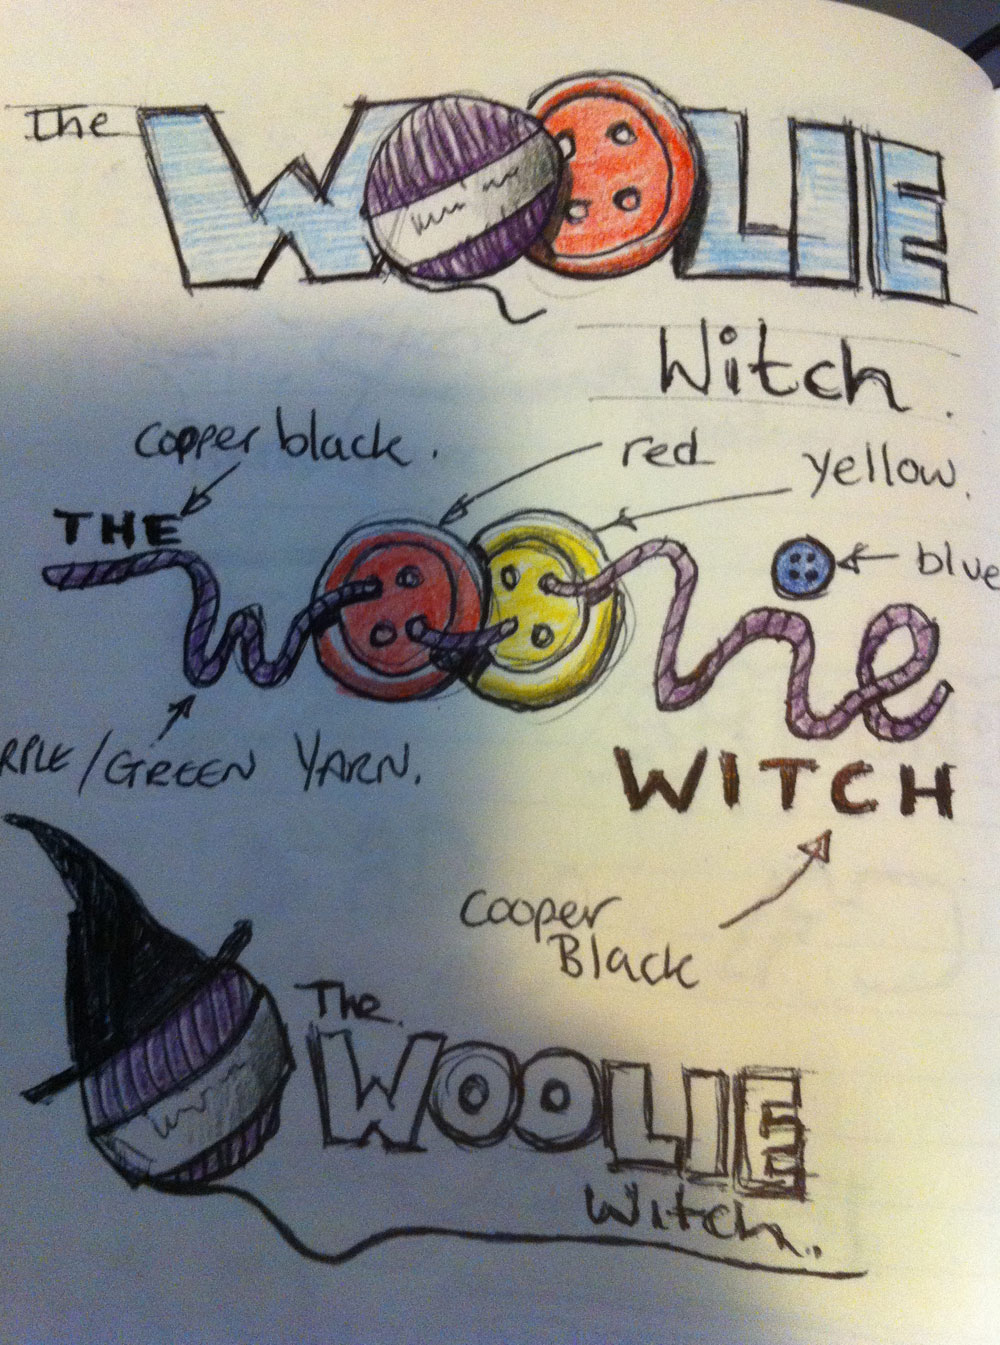 the woolie witch